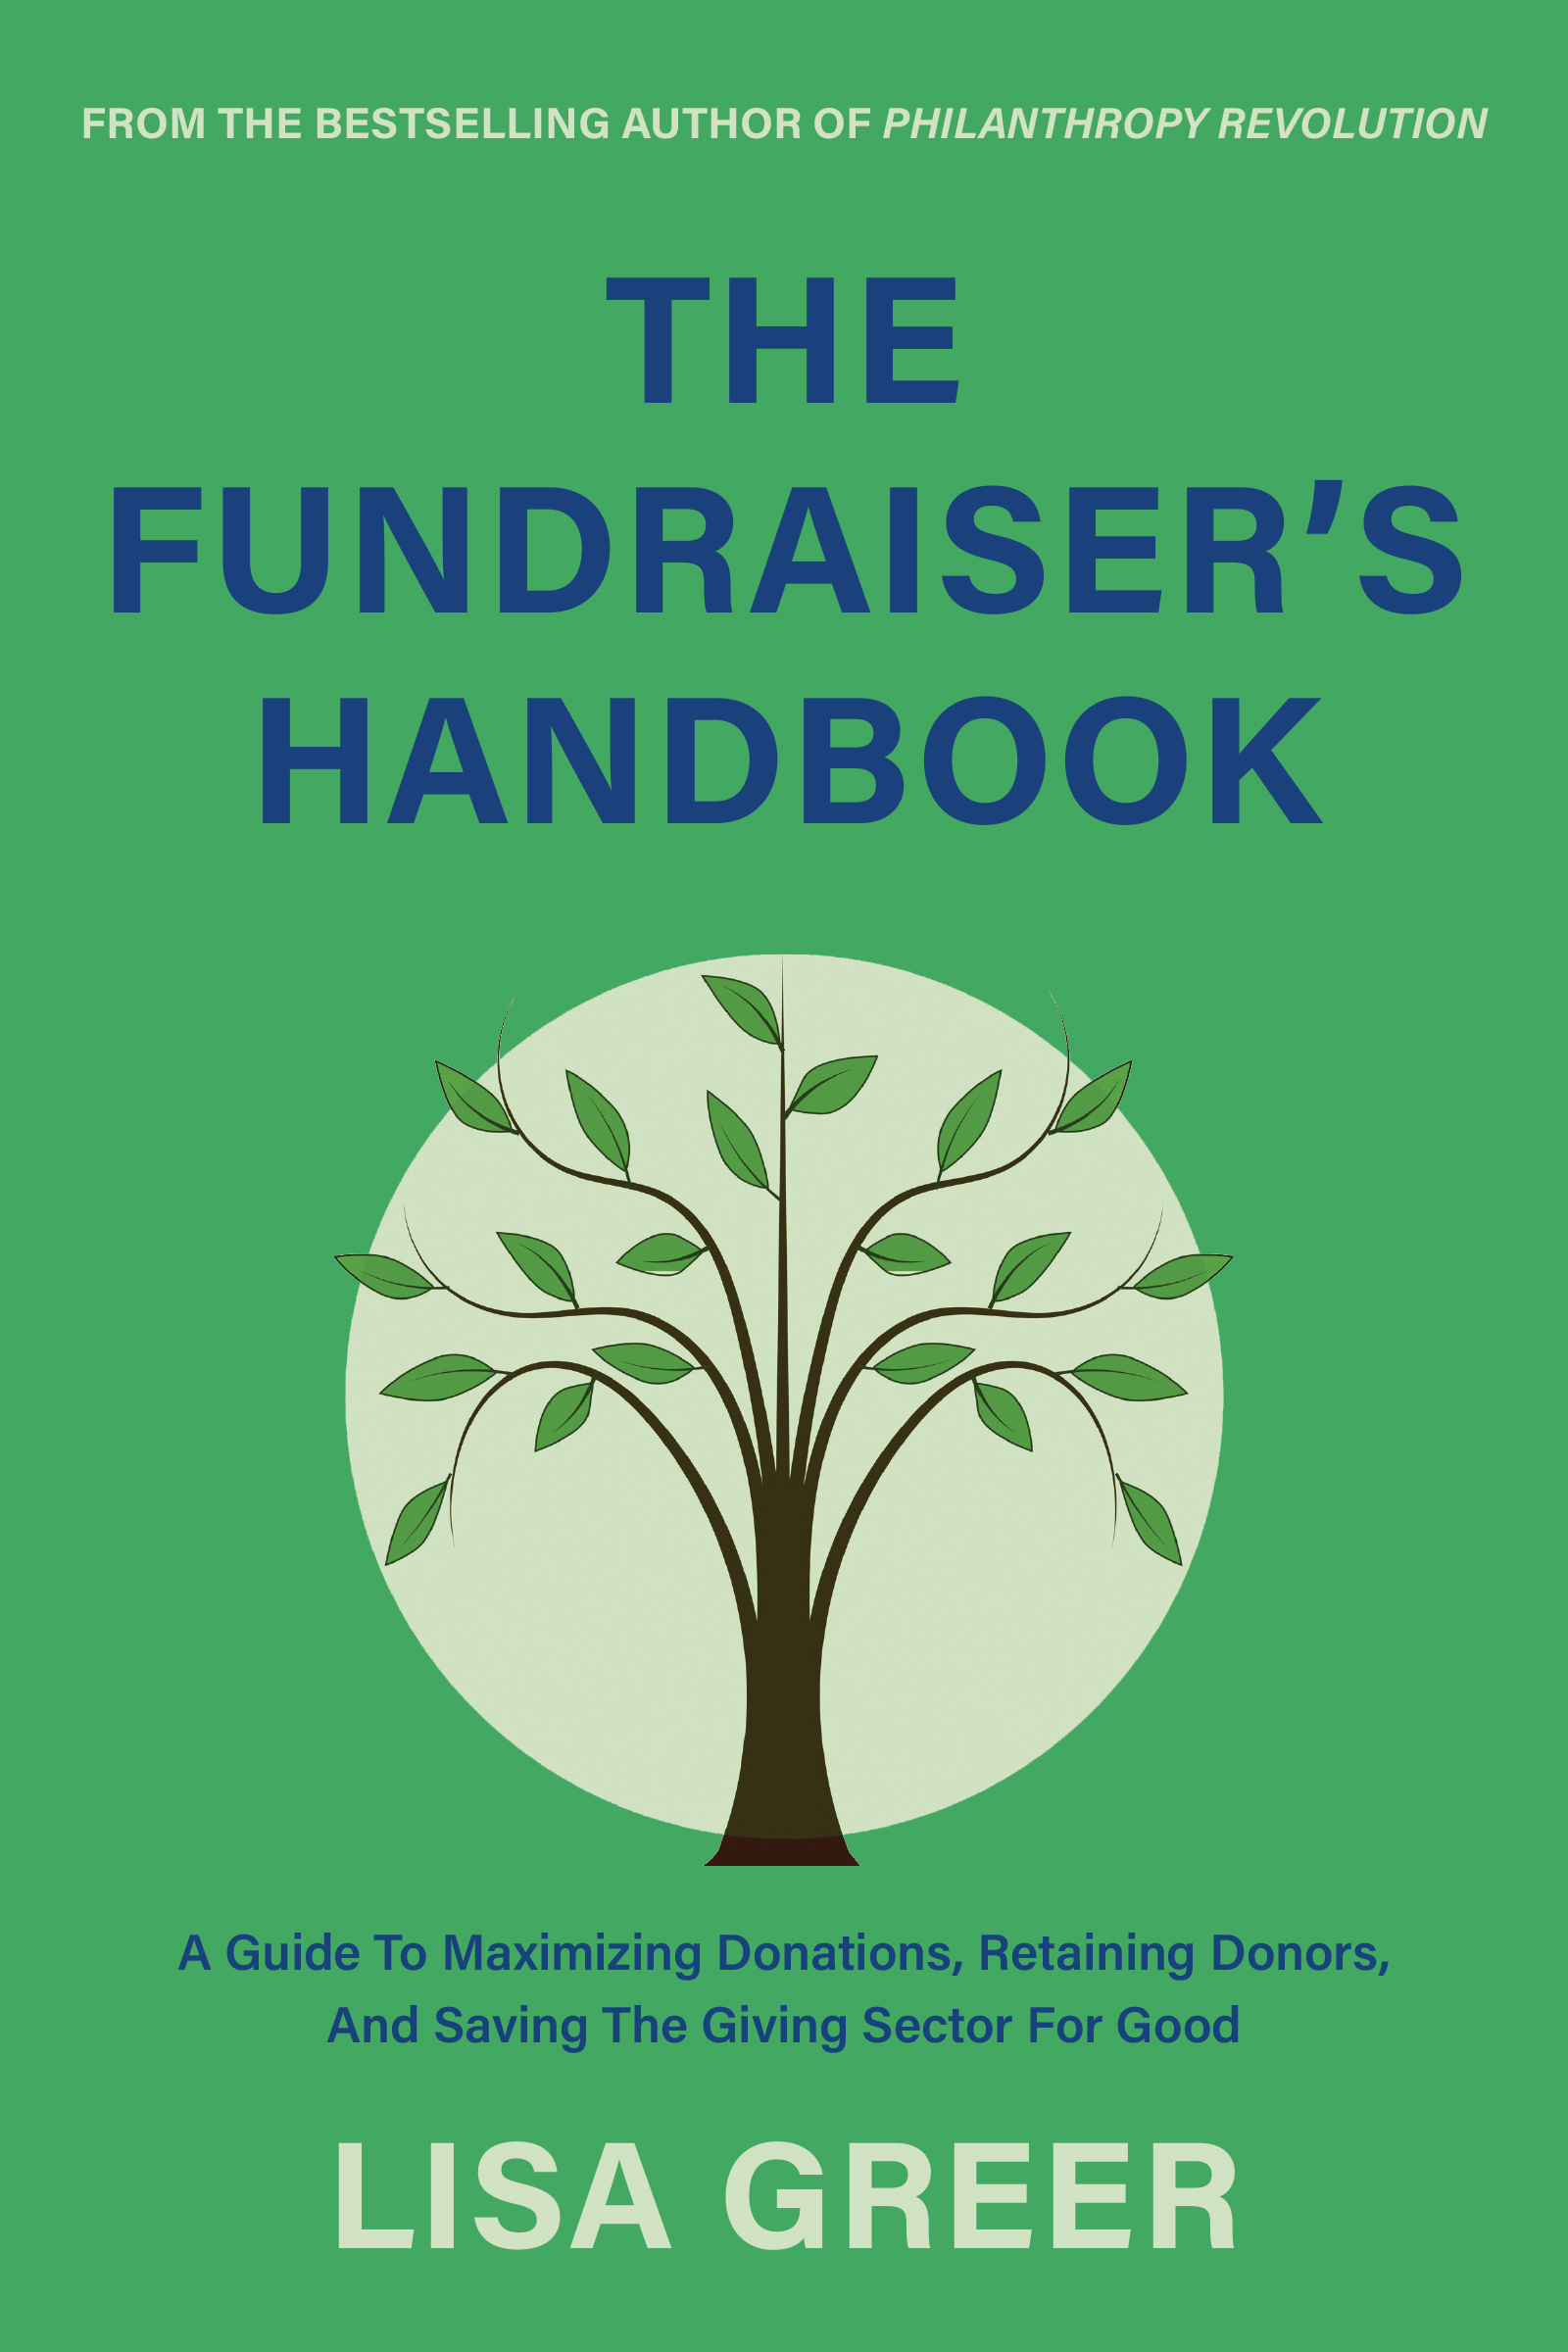 Bright green cover featuring an illustrated tree, with text reading: "From the bestselling author of PHILANTHROPY REVOLUTION, The Fundraiser's Handbook, A Guide to Maximizing Donations, Retaining Donors, and Saving the Giving Sector for Good by Lisa Greer"